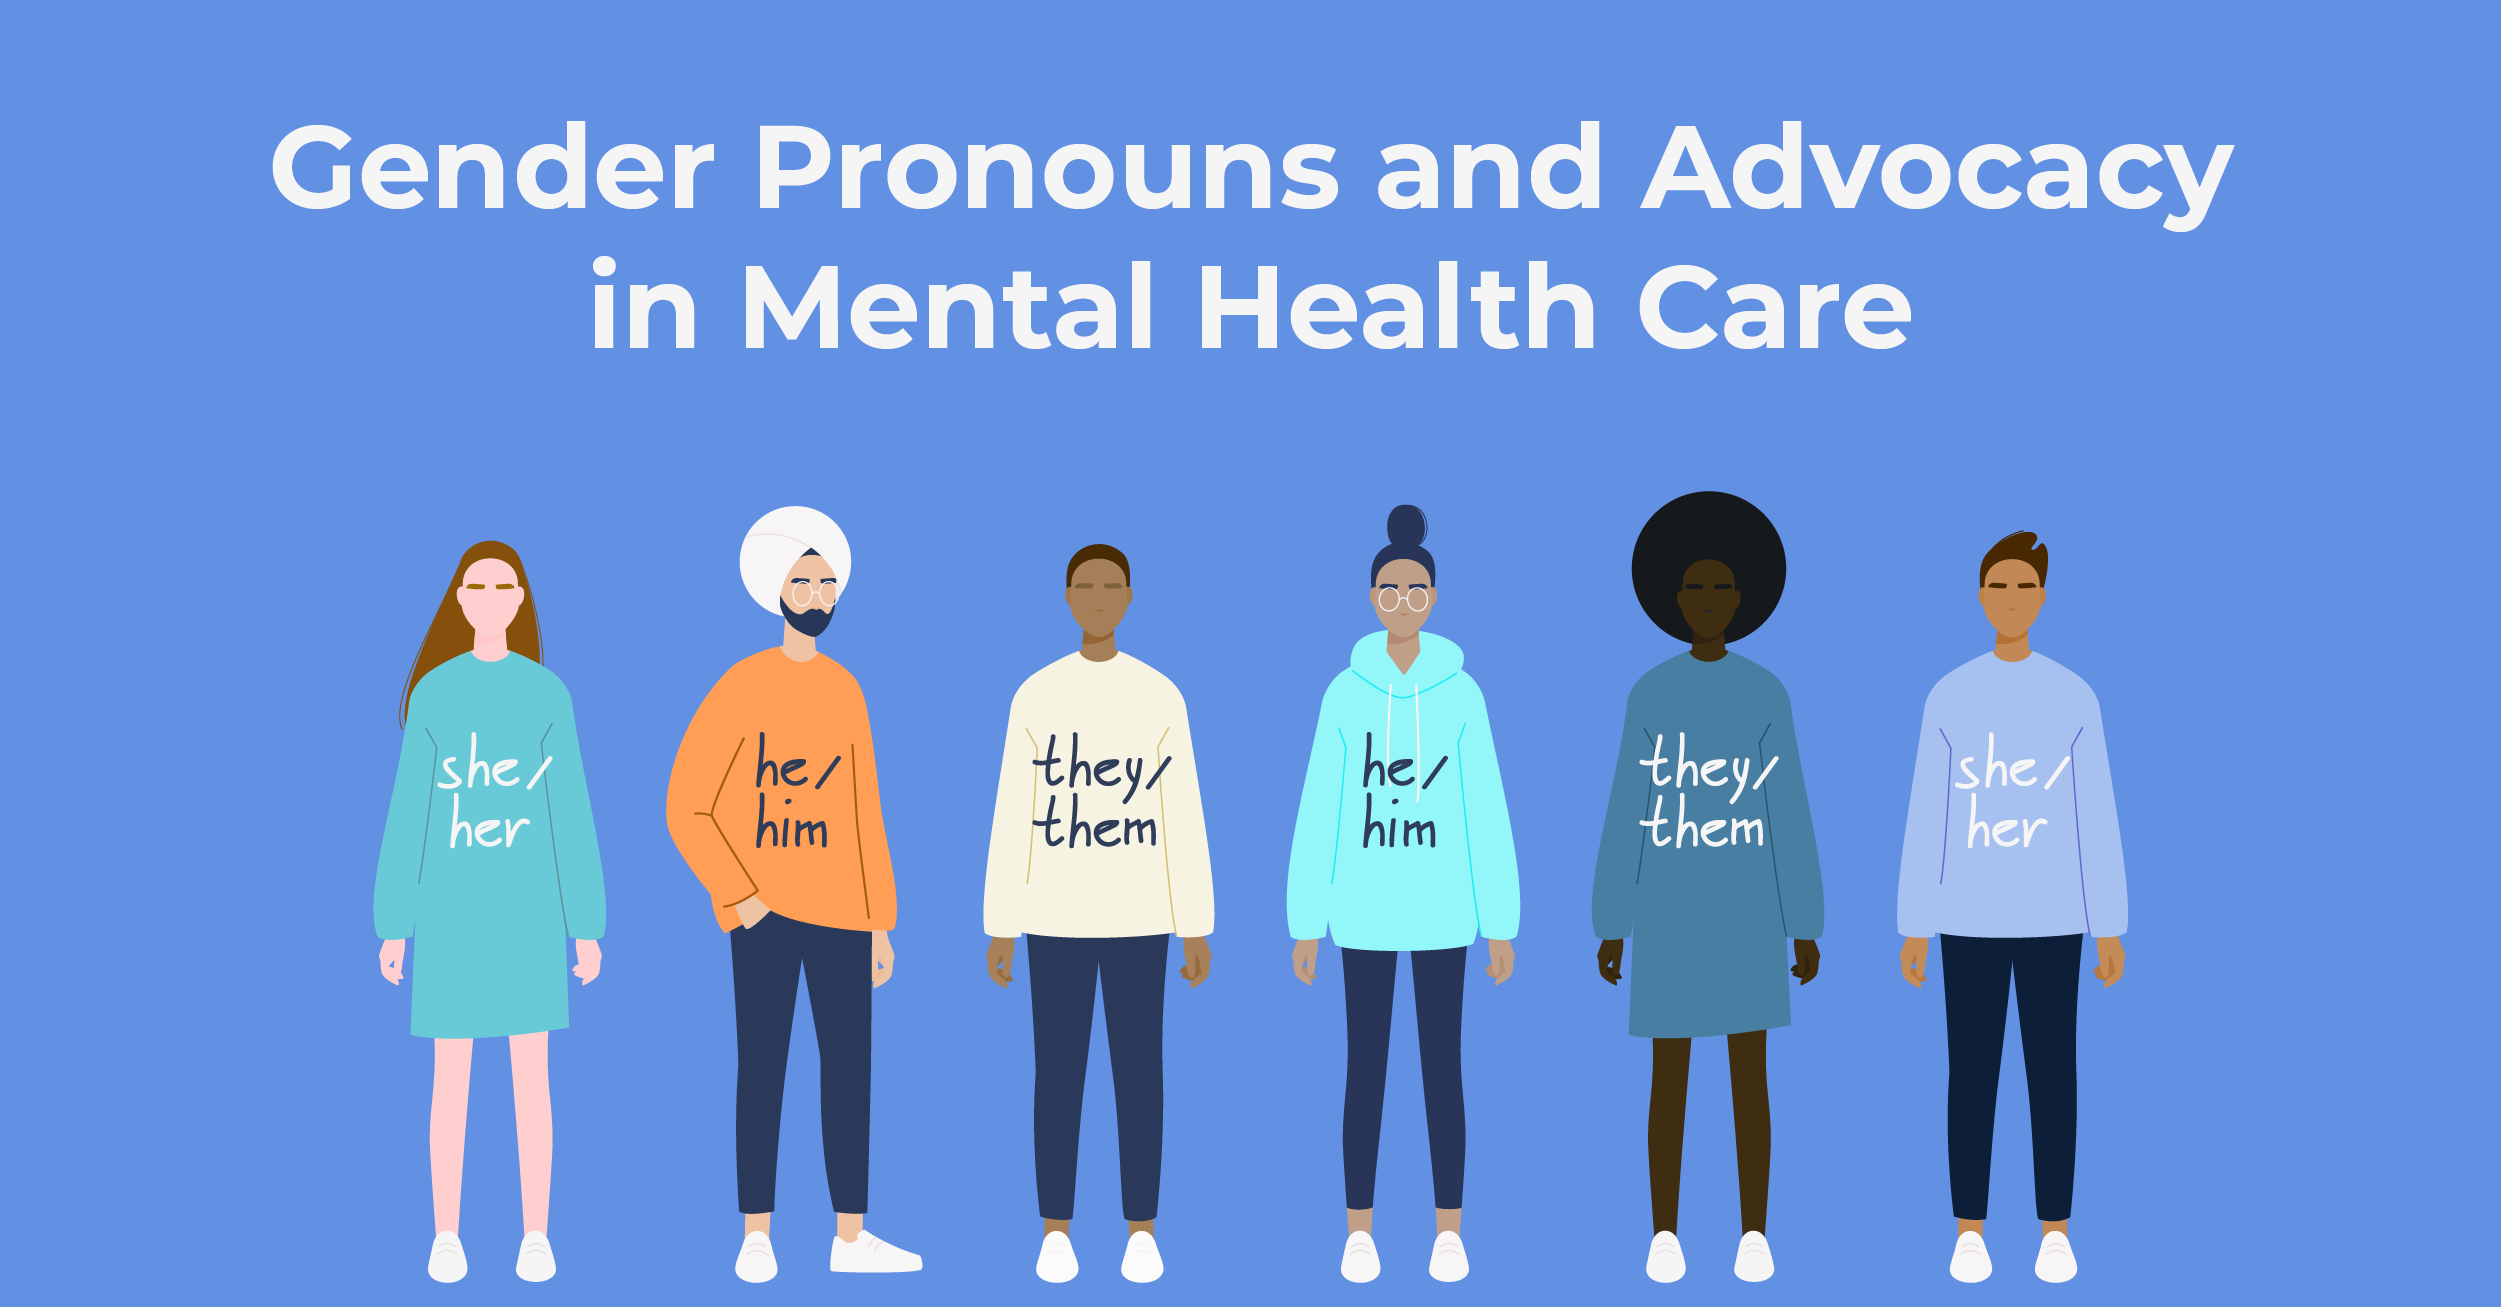 Gender Pronouns and Advocacy in Mental Health Care